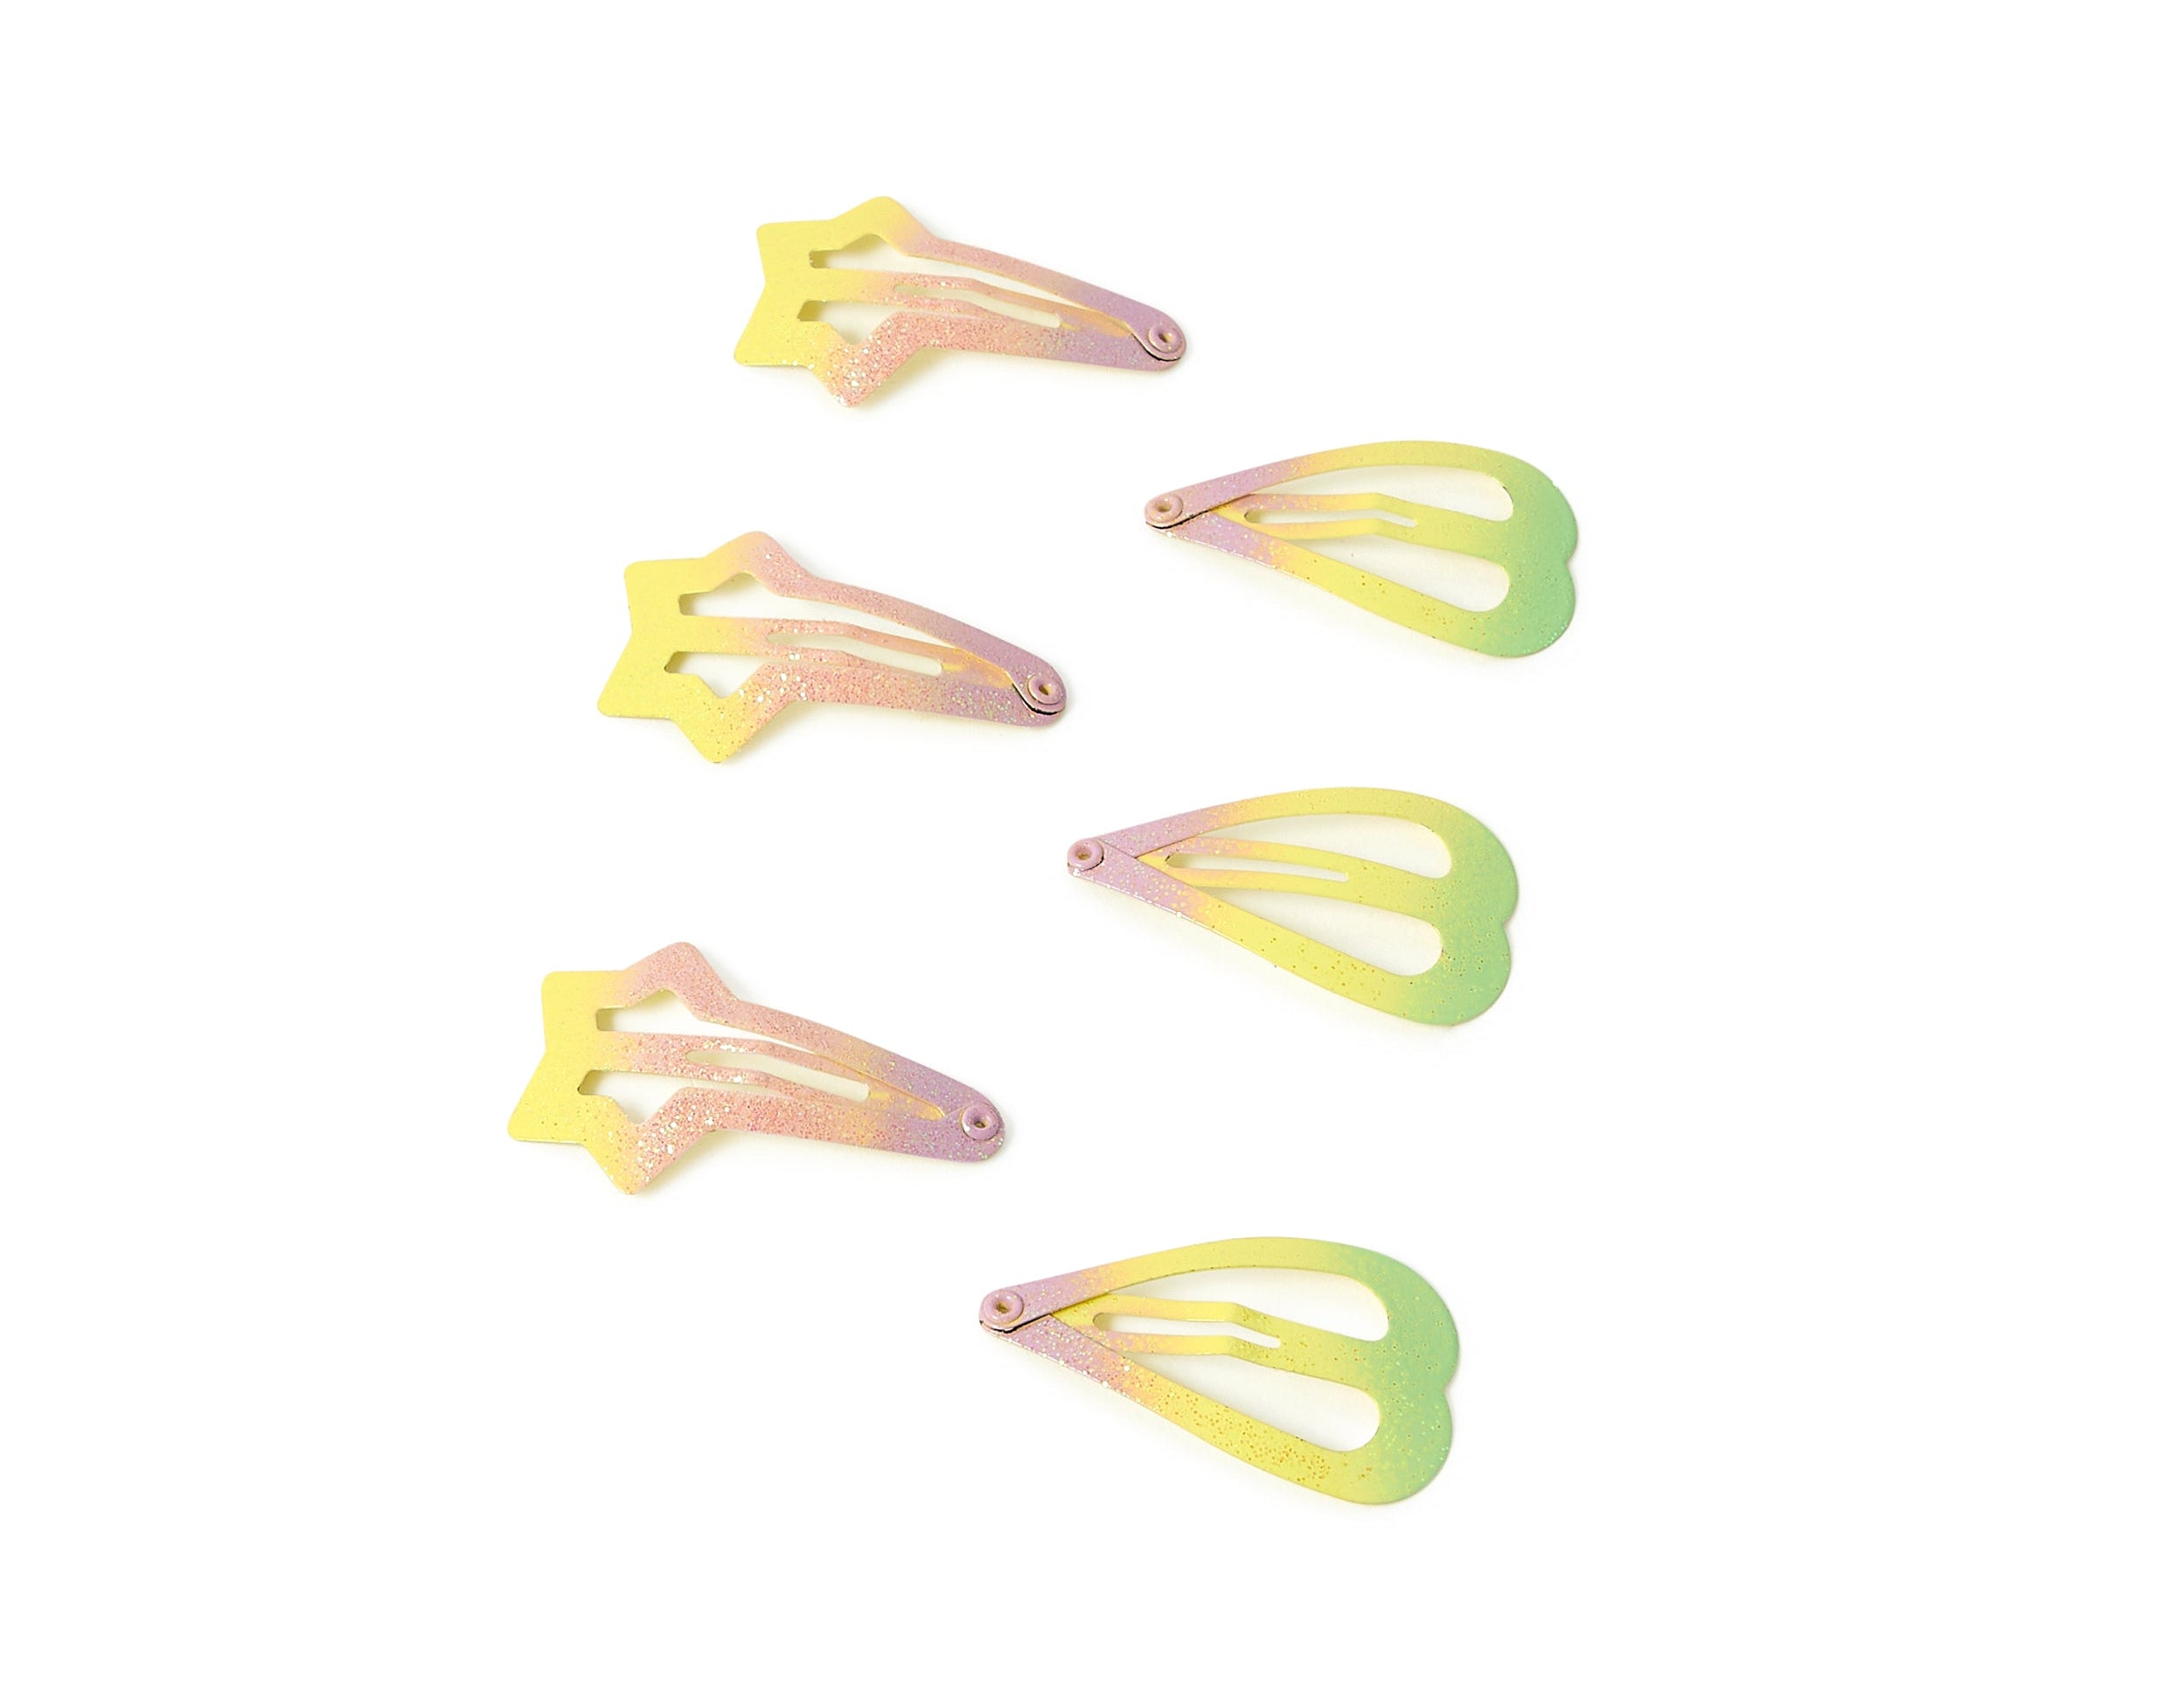 Accessorize Girl Set of 6 Star And Heart Ombre Clic Clacs Hair Clips